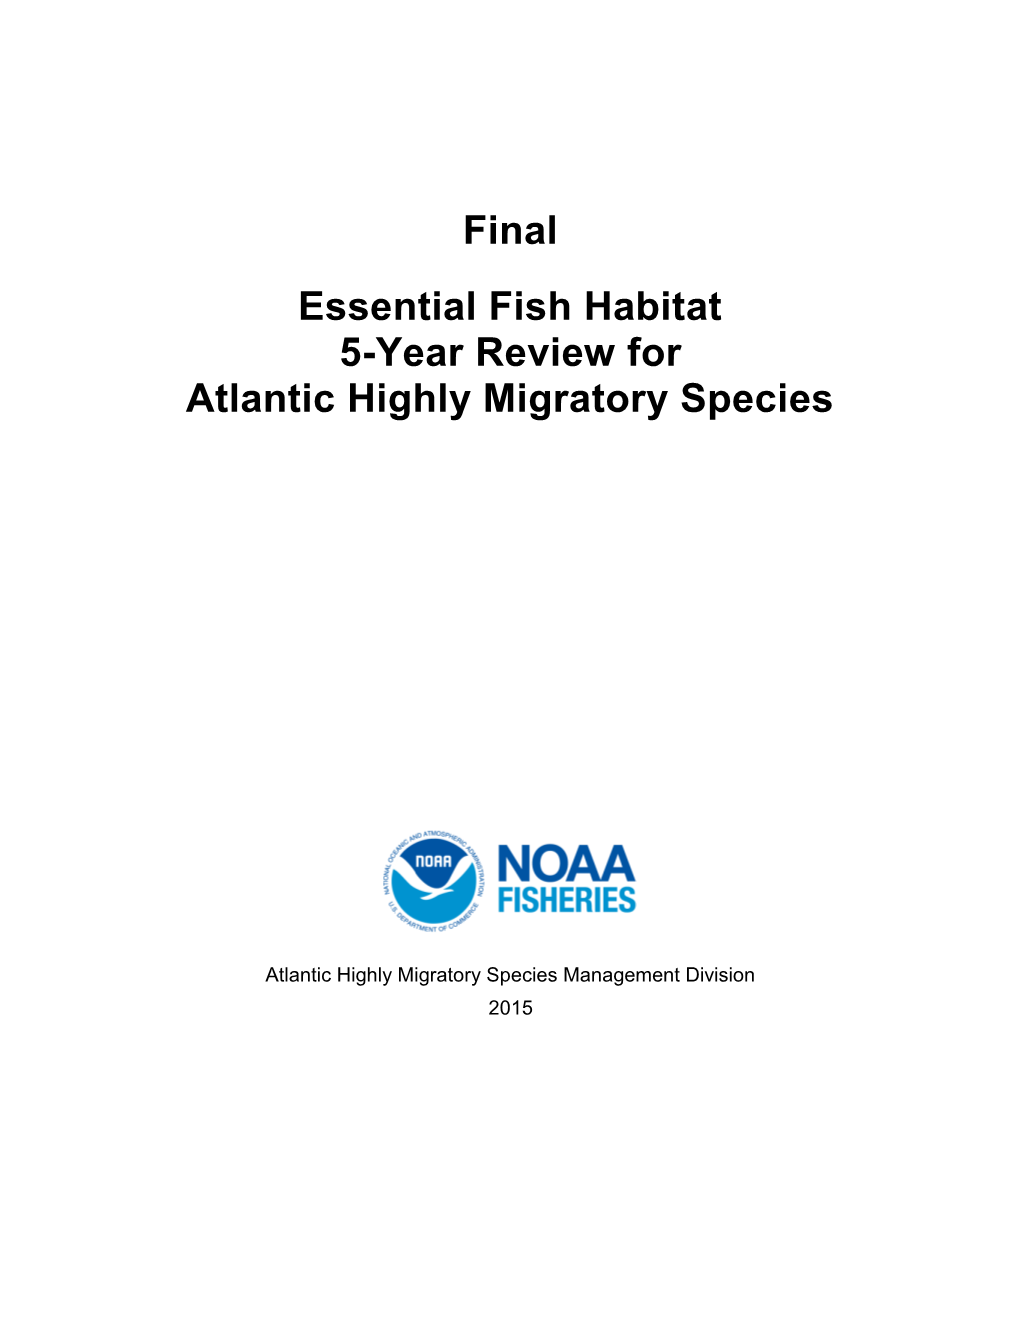 Final 5-Year Review of EFH for Atlantic Highly Migratory Species (HMS)